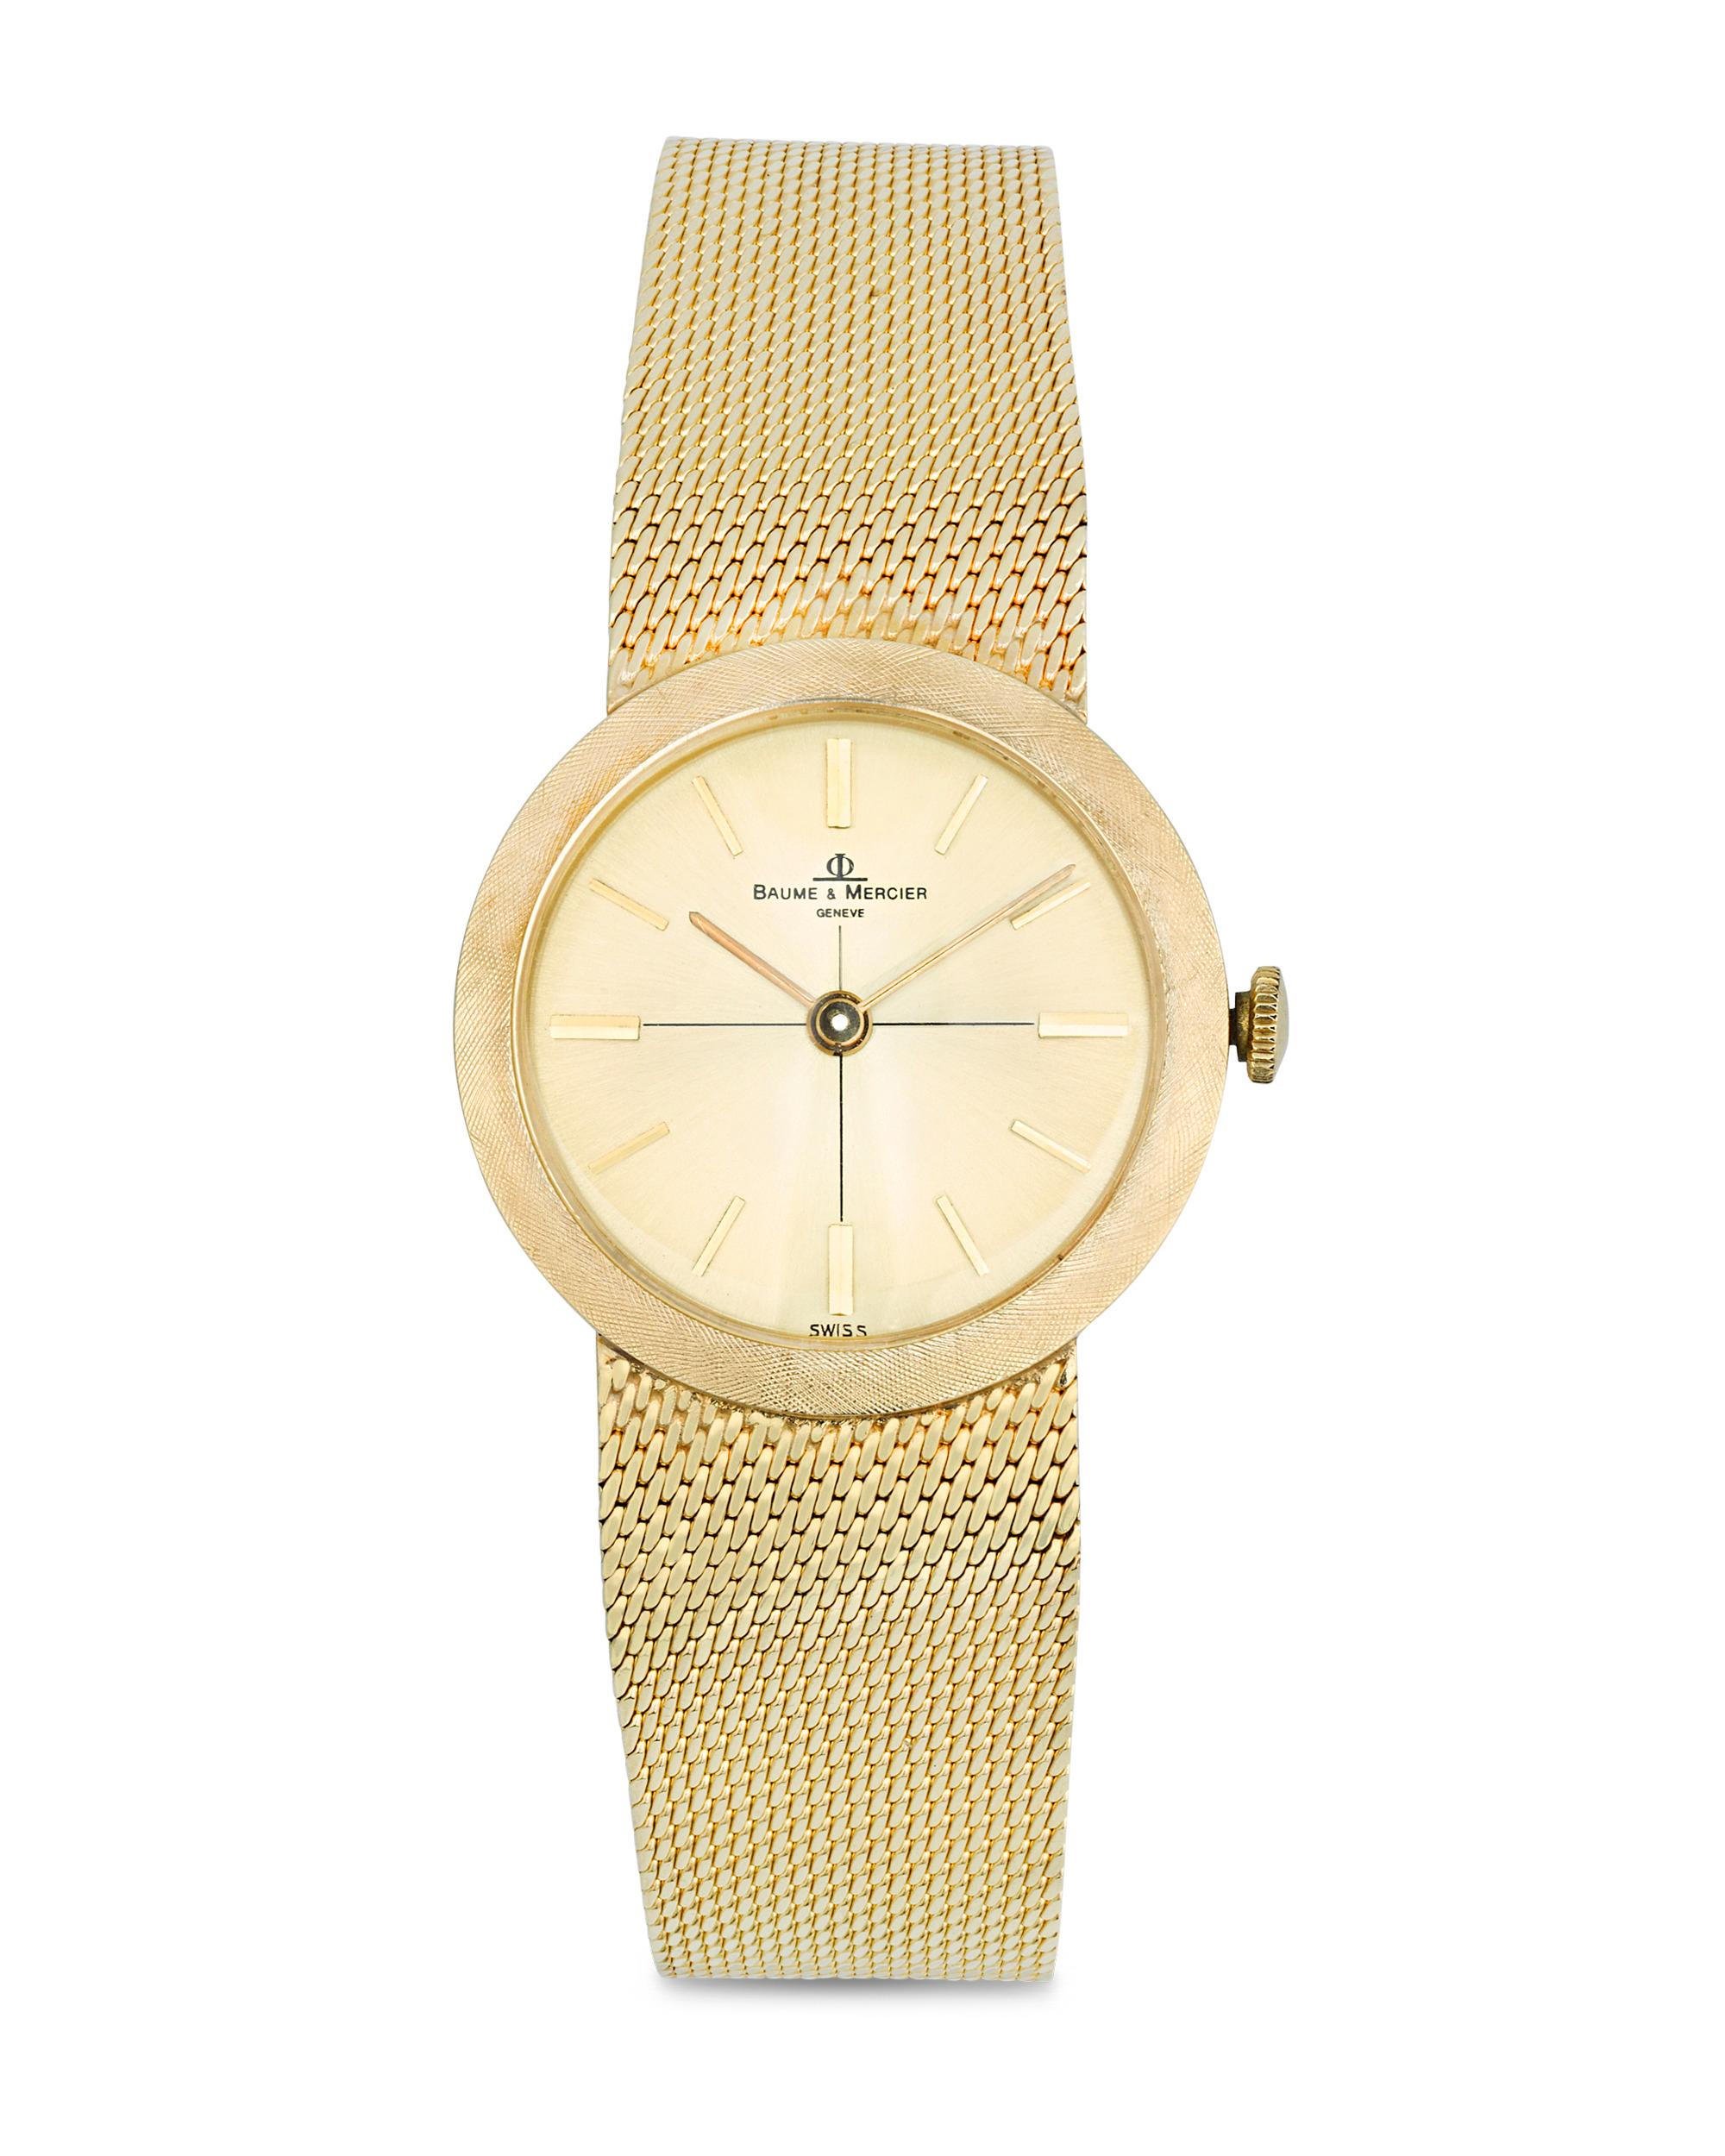 This watch was once owned and worn by one of the most celebrated cultural icons of the 20th century, Elvis Presley. The striking Baume & Mercier Geneve timepiece is crafted from brushed and etched 14K yellow gold and a weave-patterned gold band,